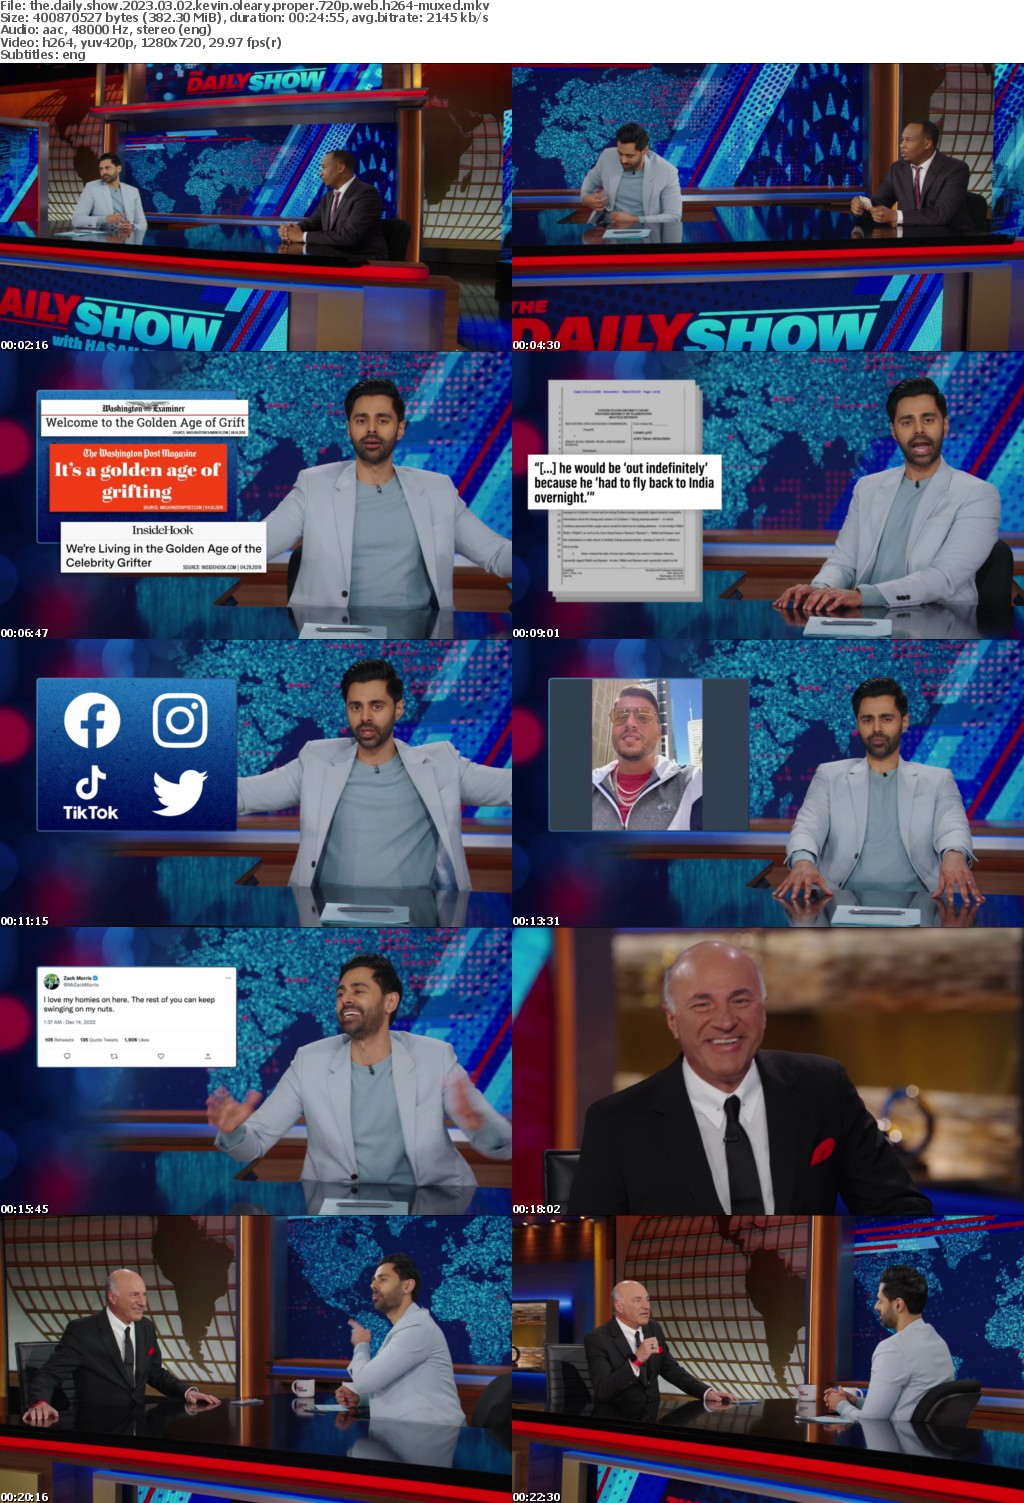 The Daily Show 2023 03 02 Kevin OLeary PROPER 720p WEB H264-MUXED